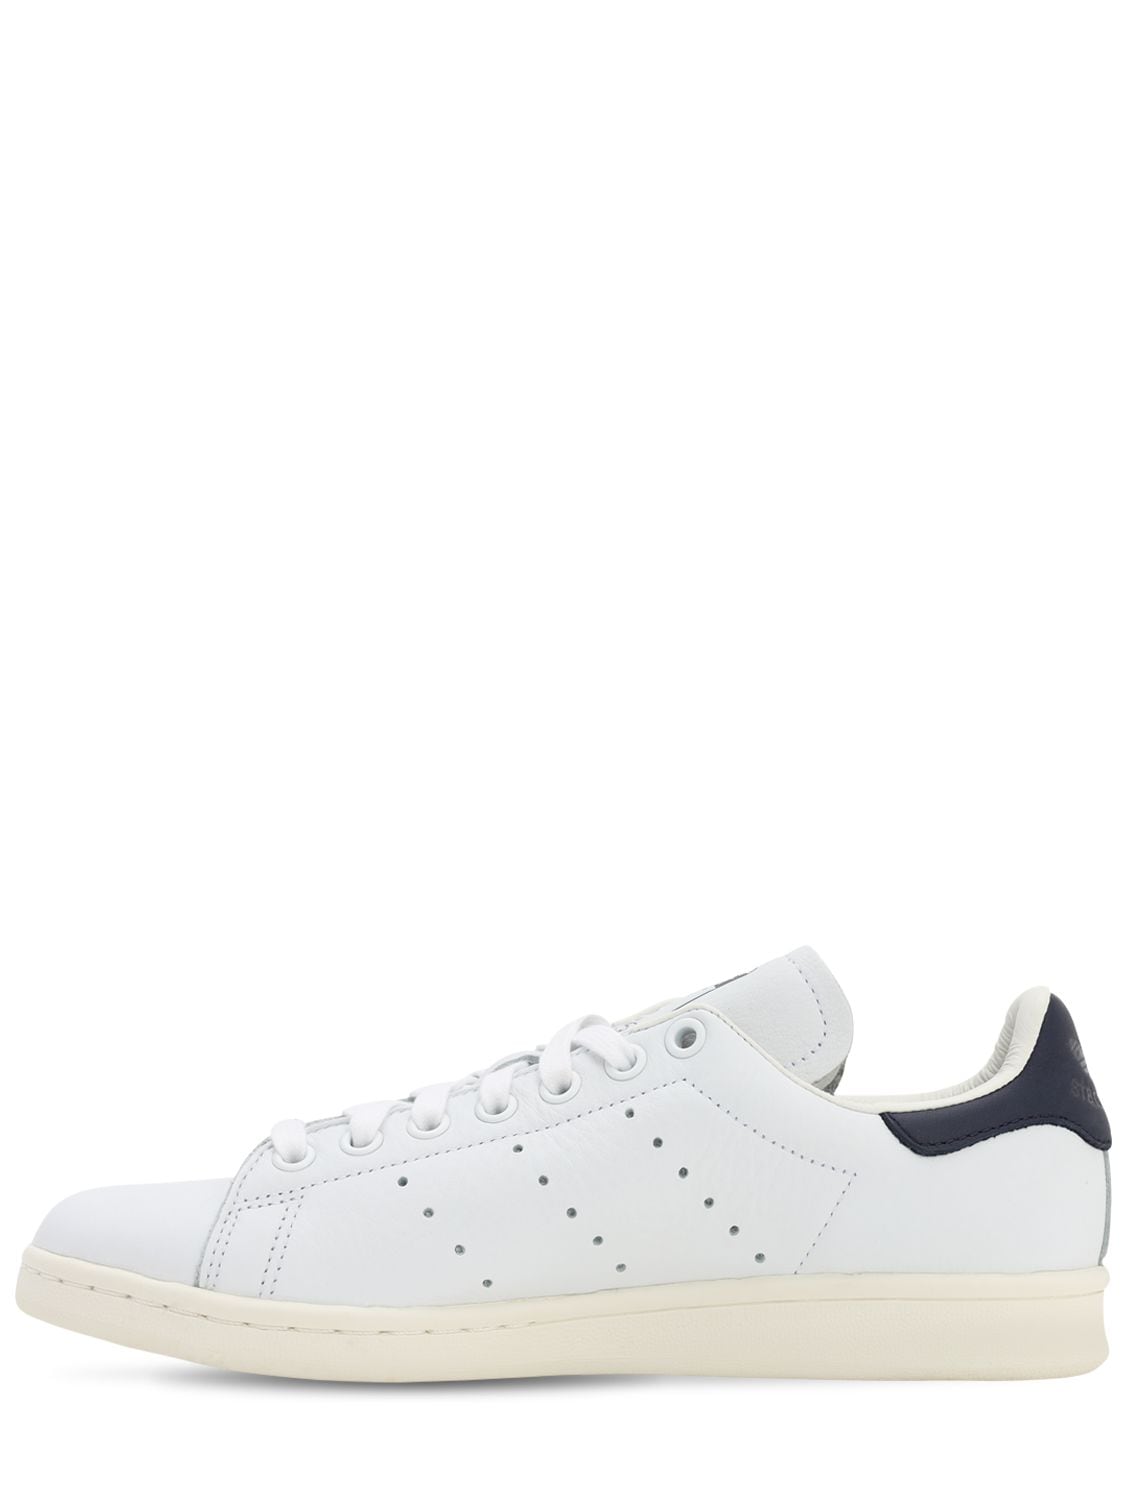 Adidas Originals Stan Smith Leather Sneakers In White | ModeSens